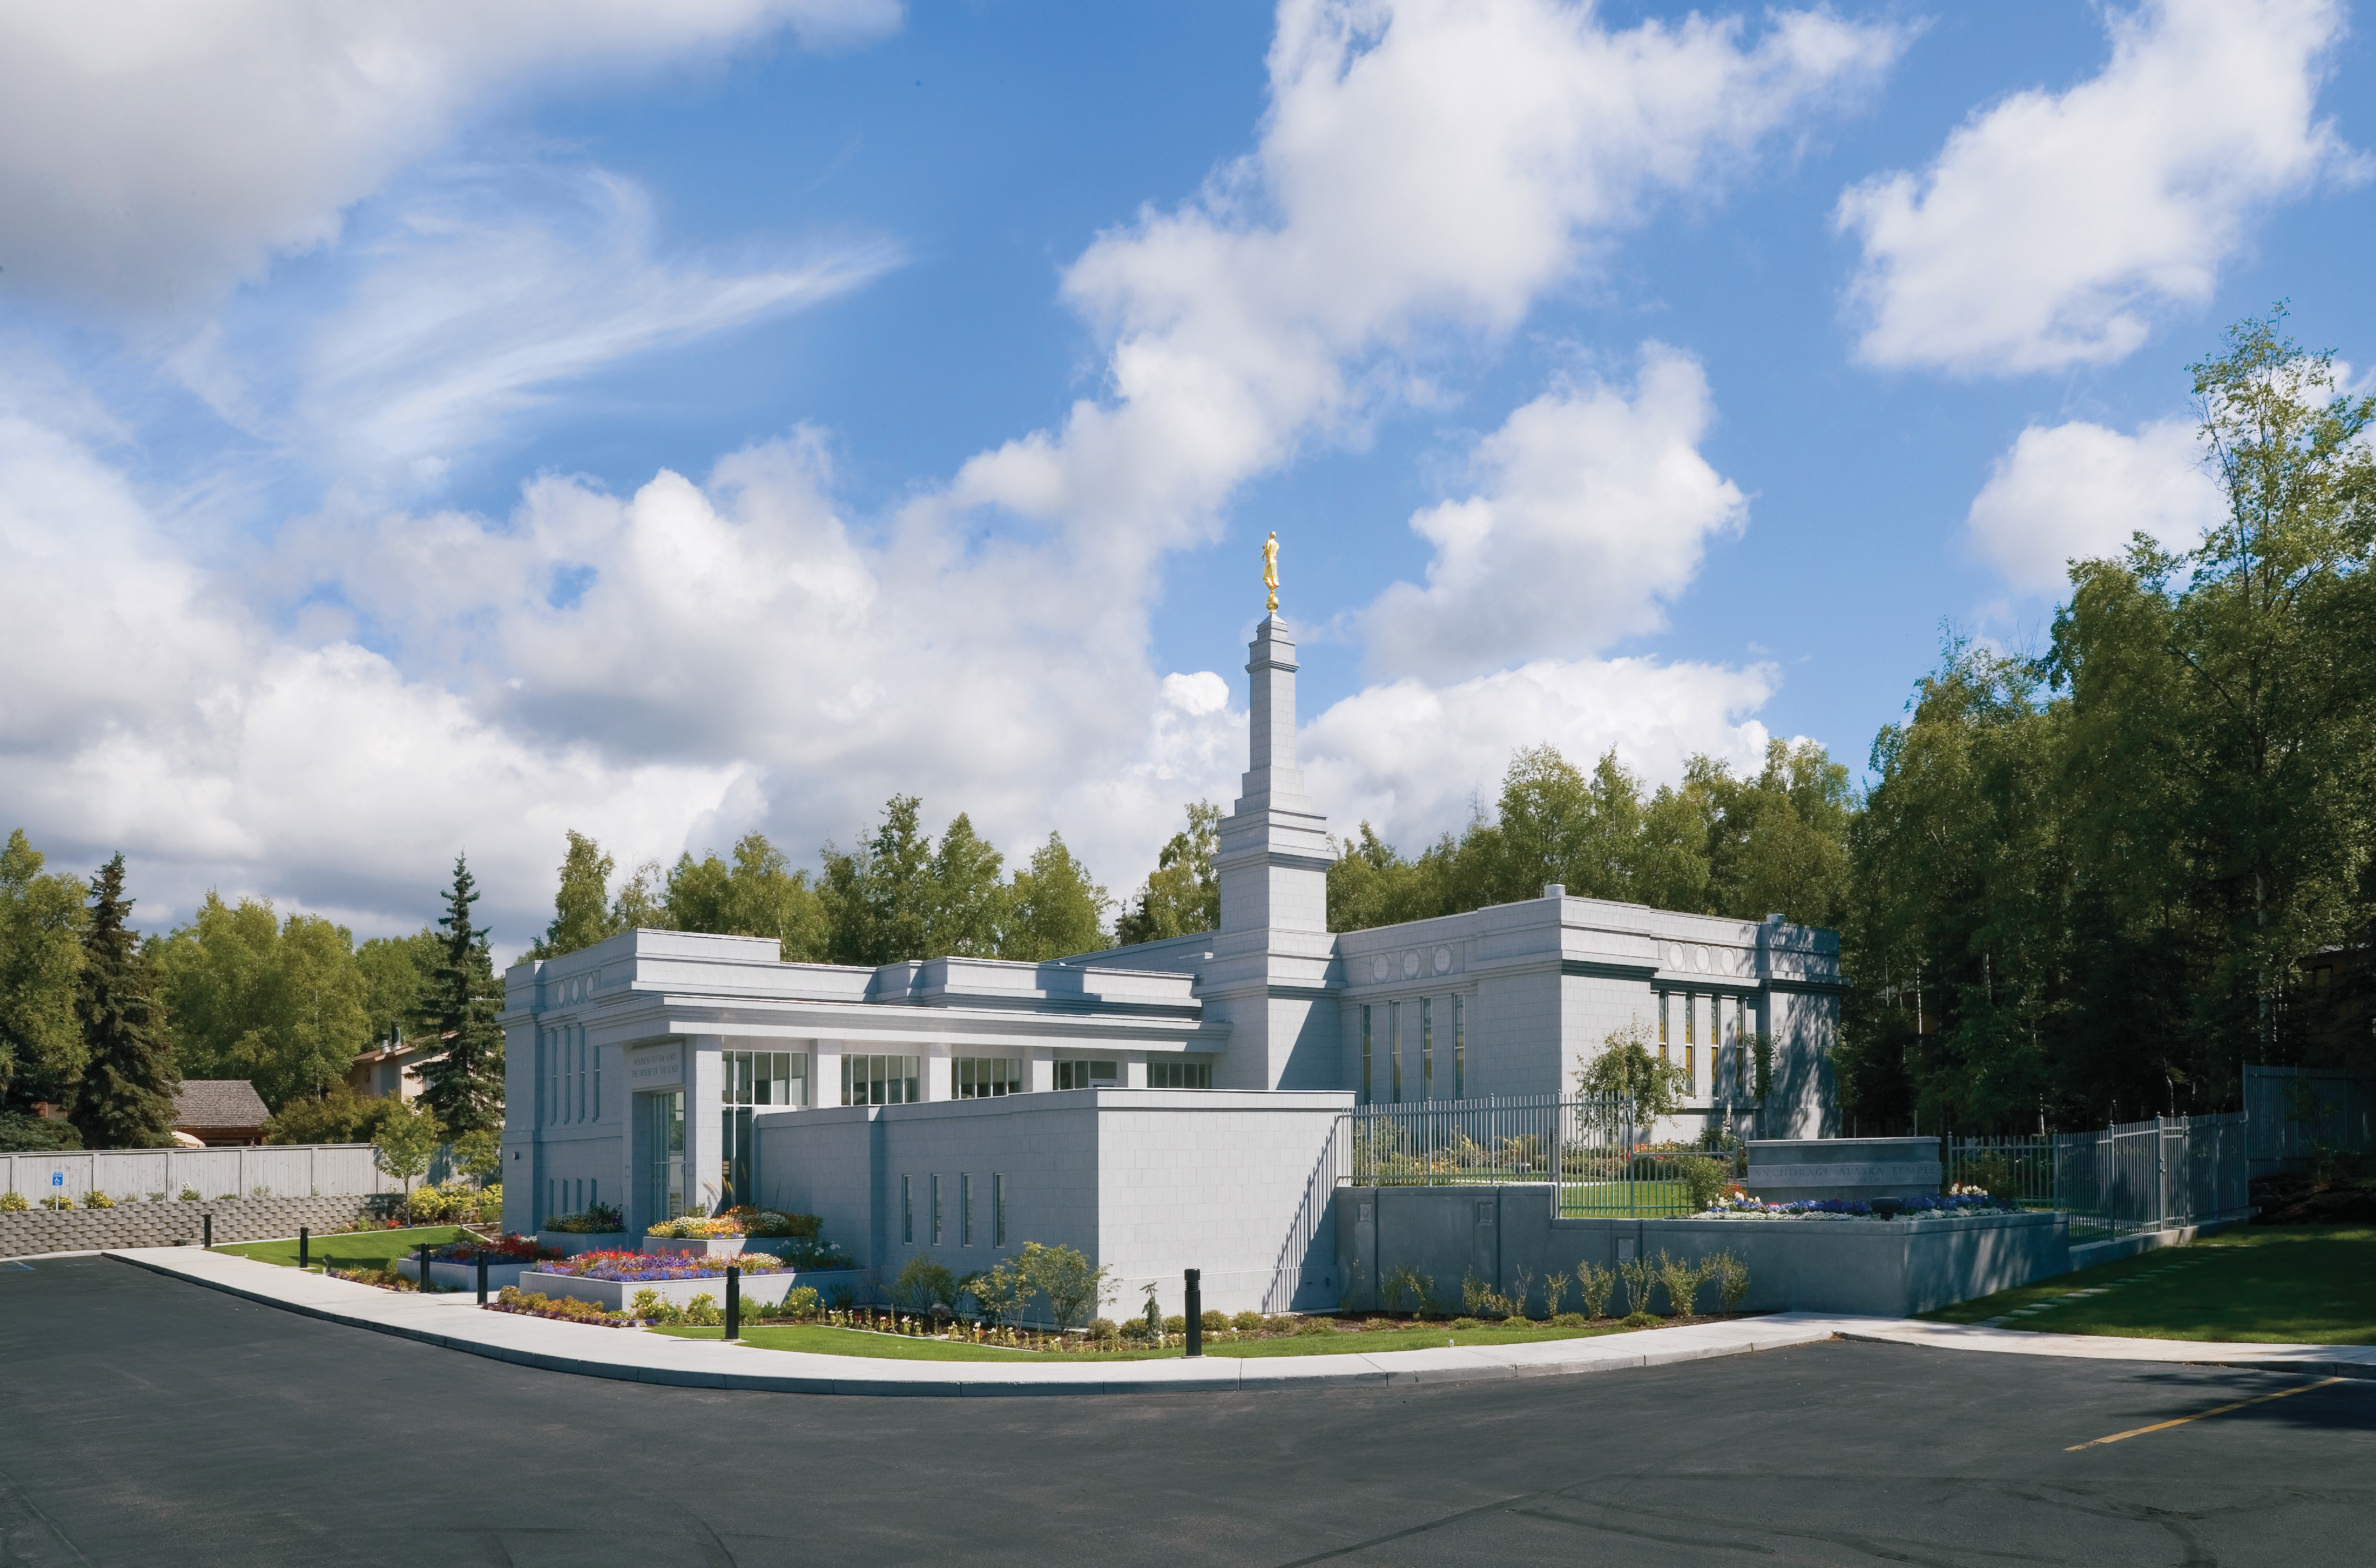 A view of the whole Anchorage Alaska Temple from one of the corners, including some of the parking lot in the foreground.